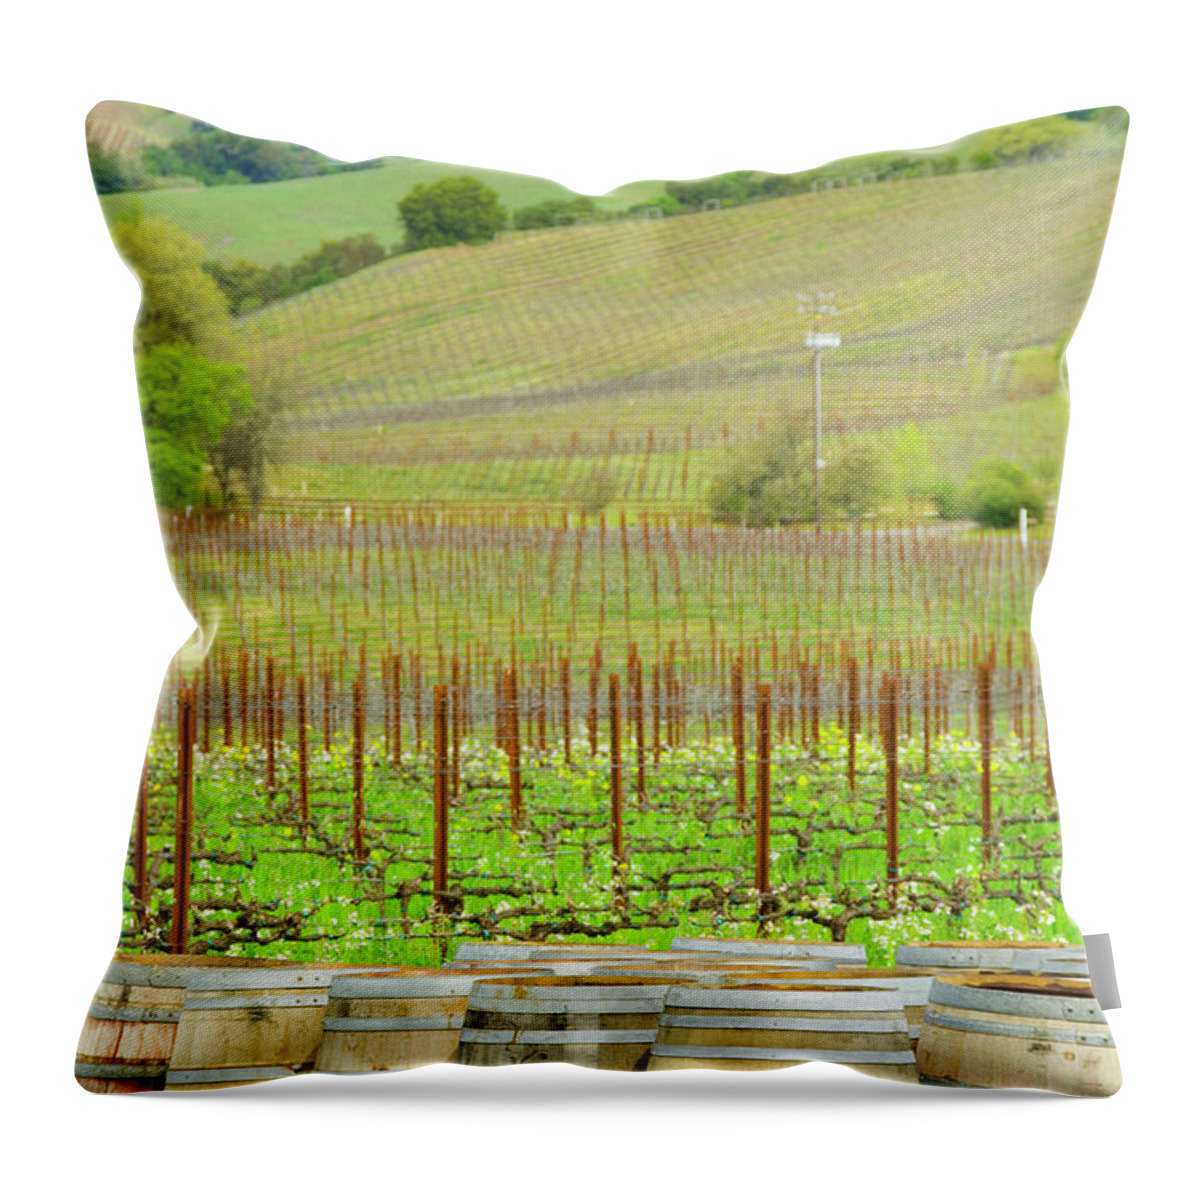 California Throw Pillow featuring the photograph Wine Barrels At The Spring Time Vinyard by Alina555